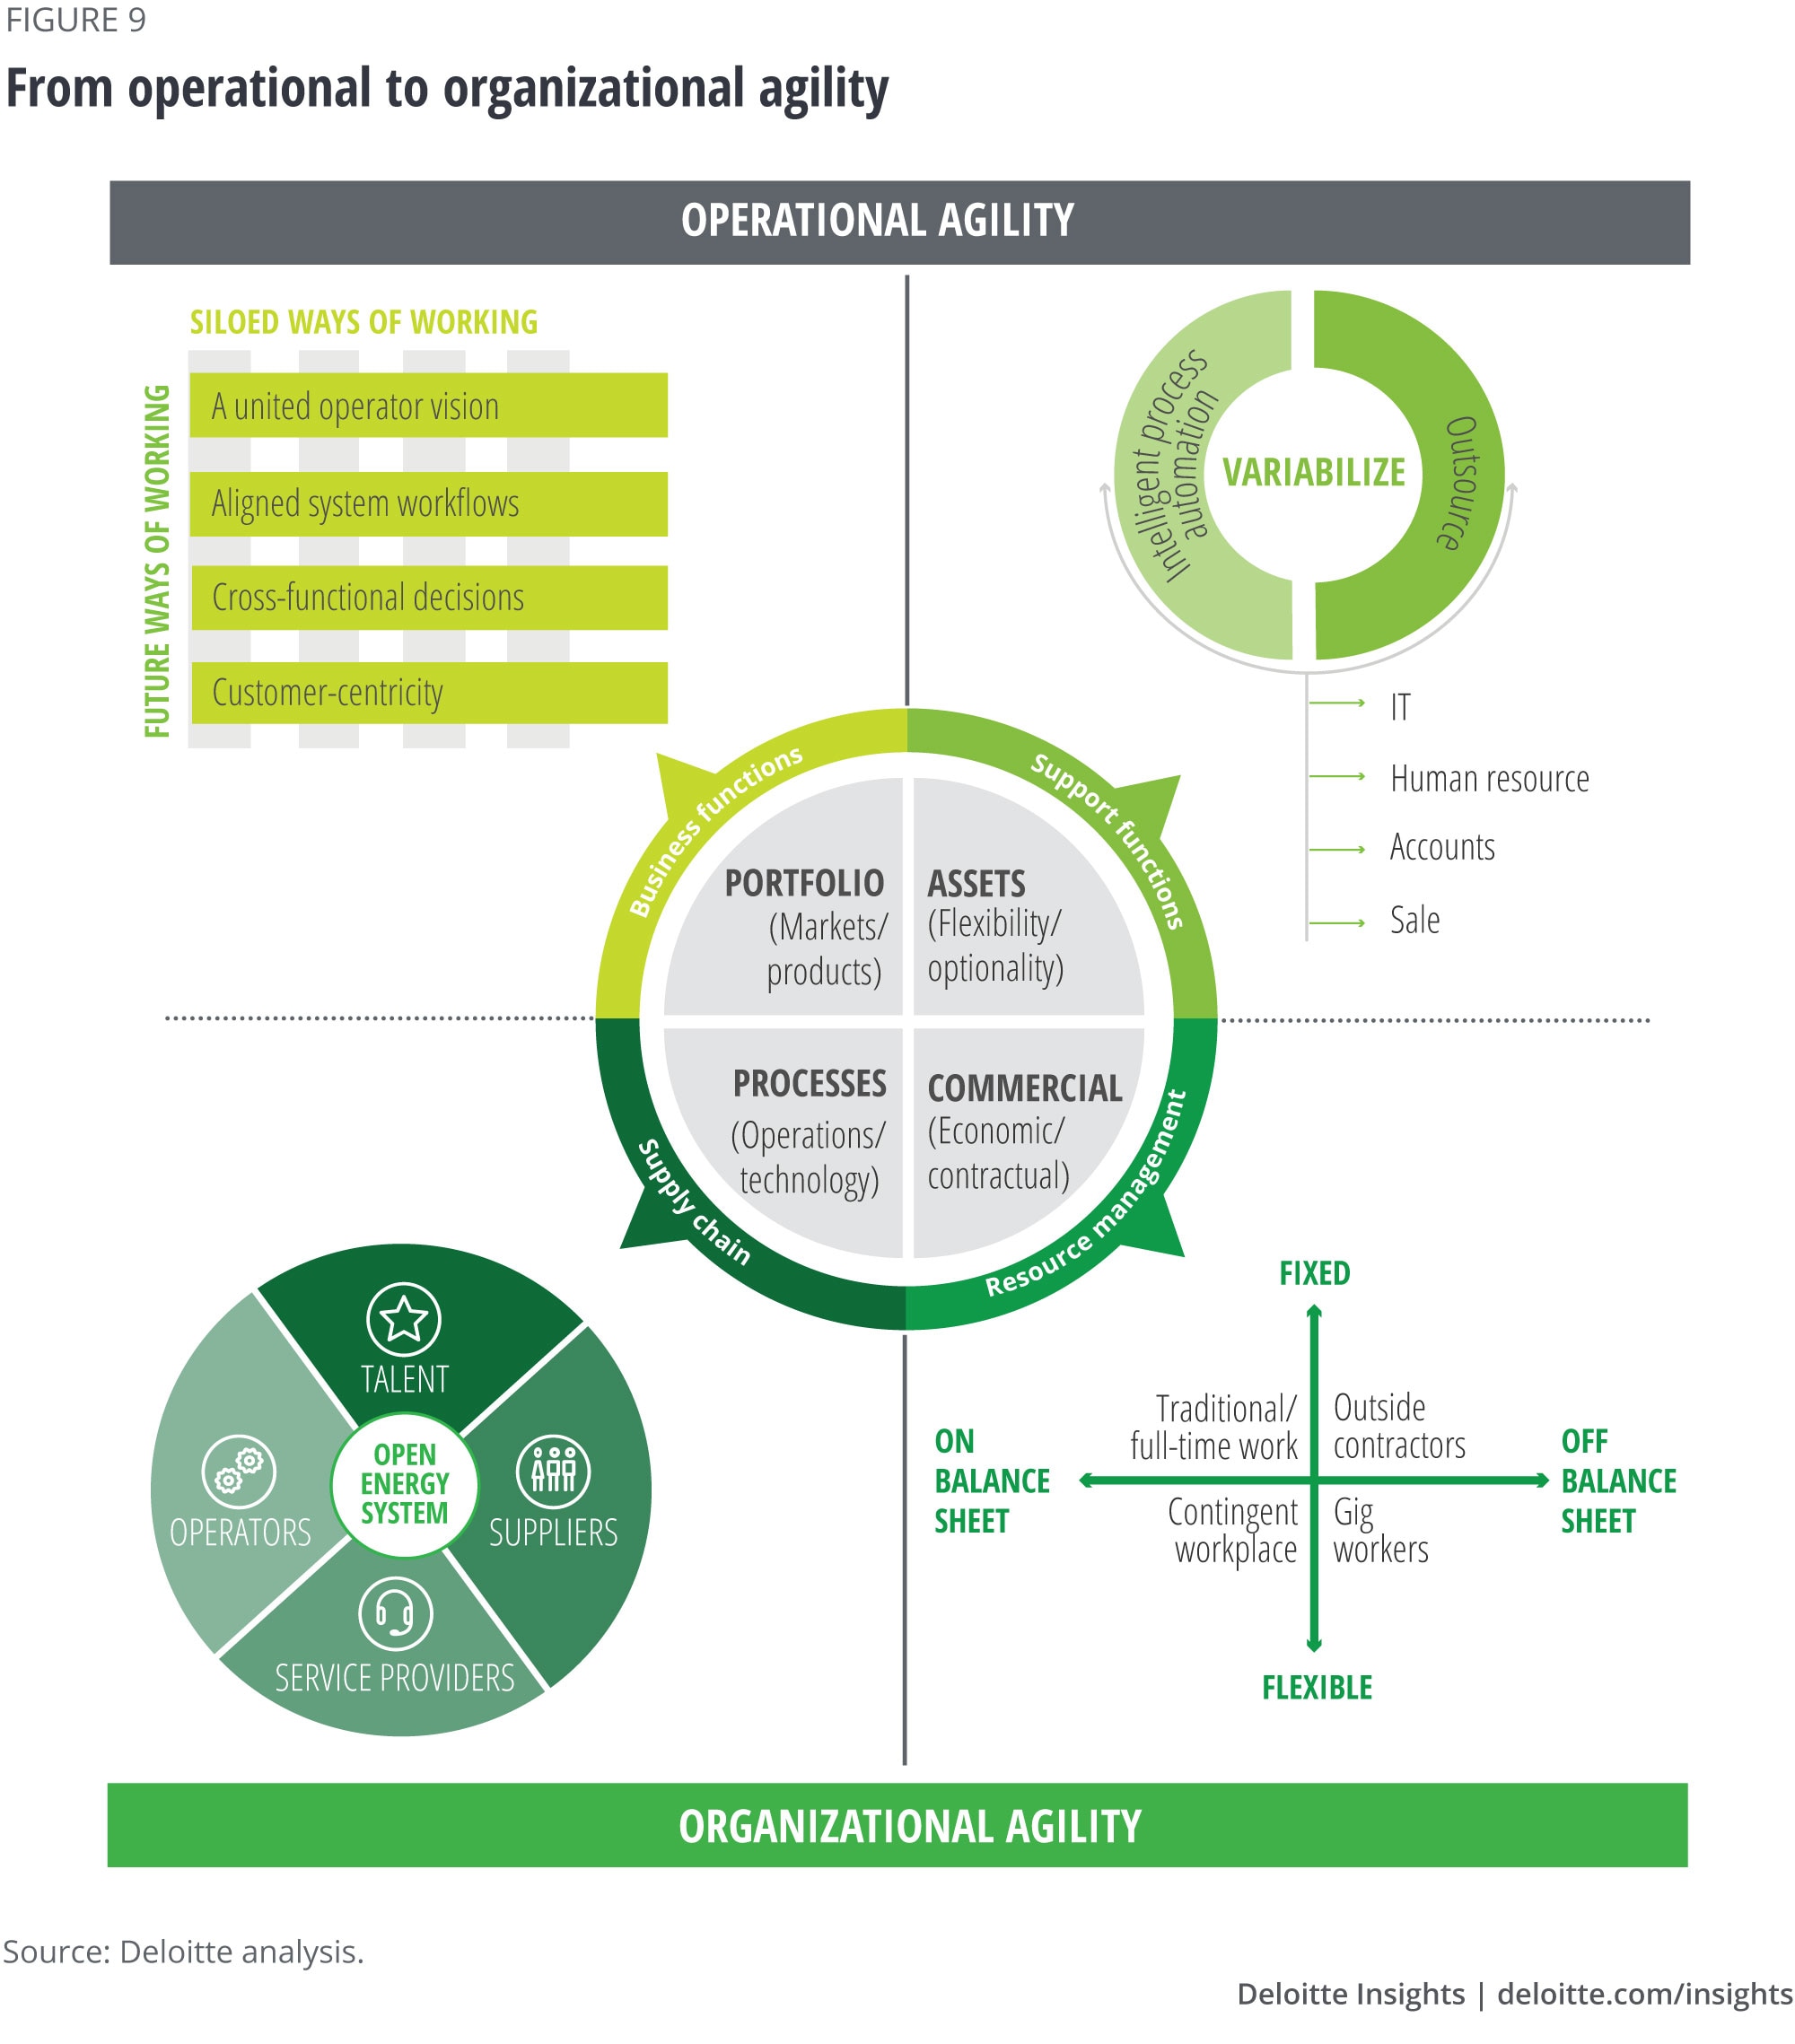 From operational to organizational agility